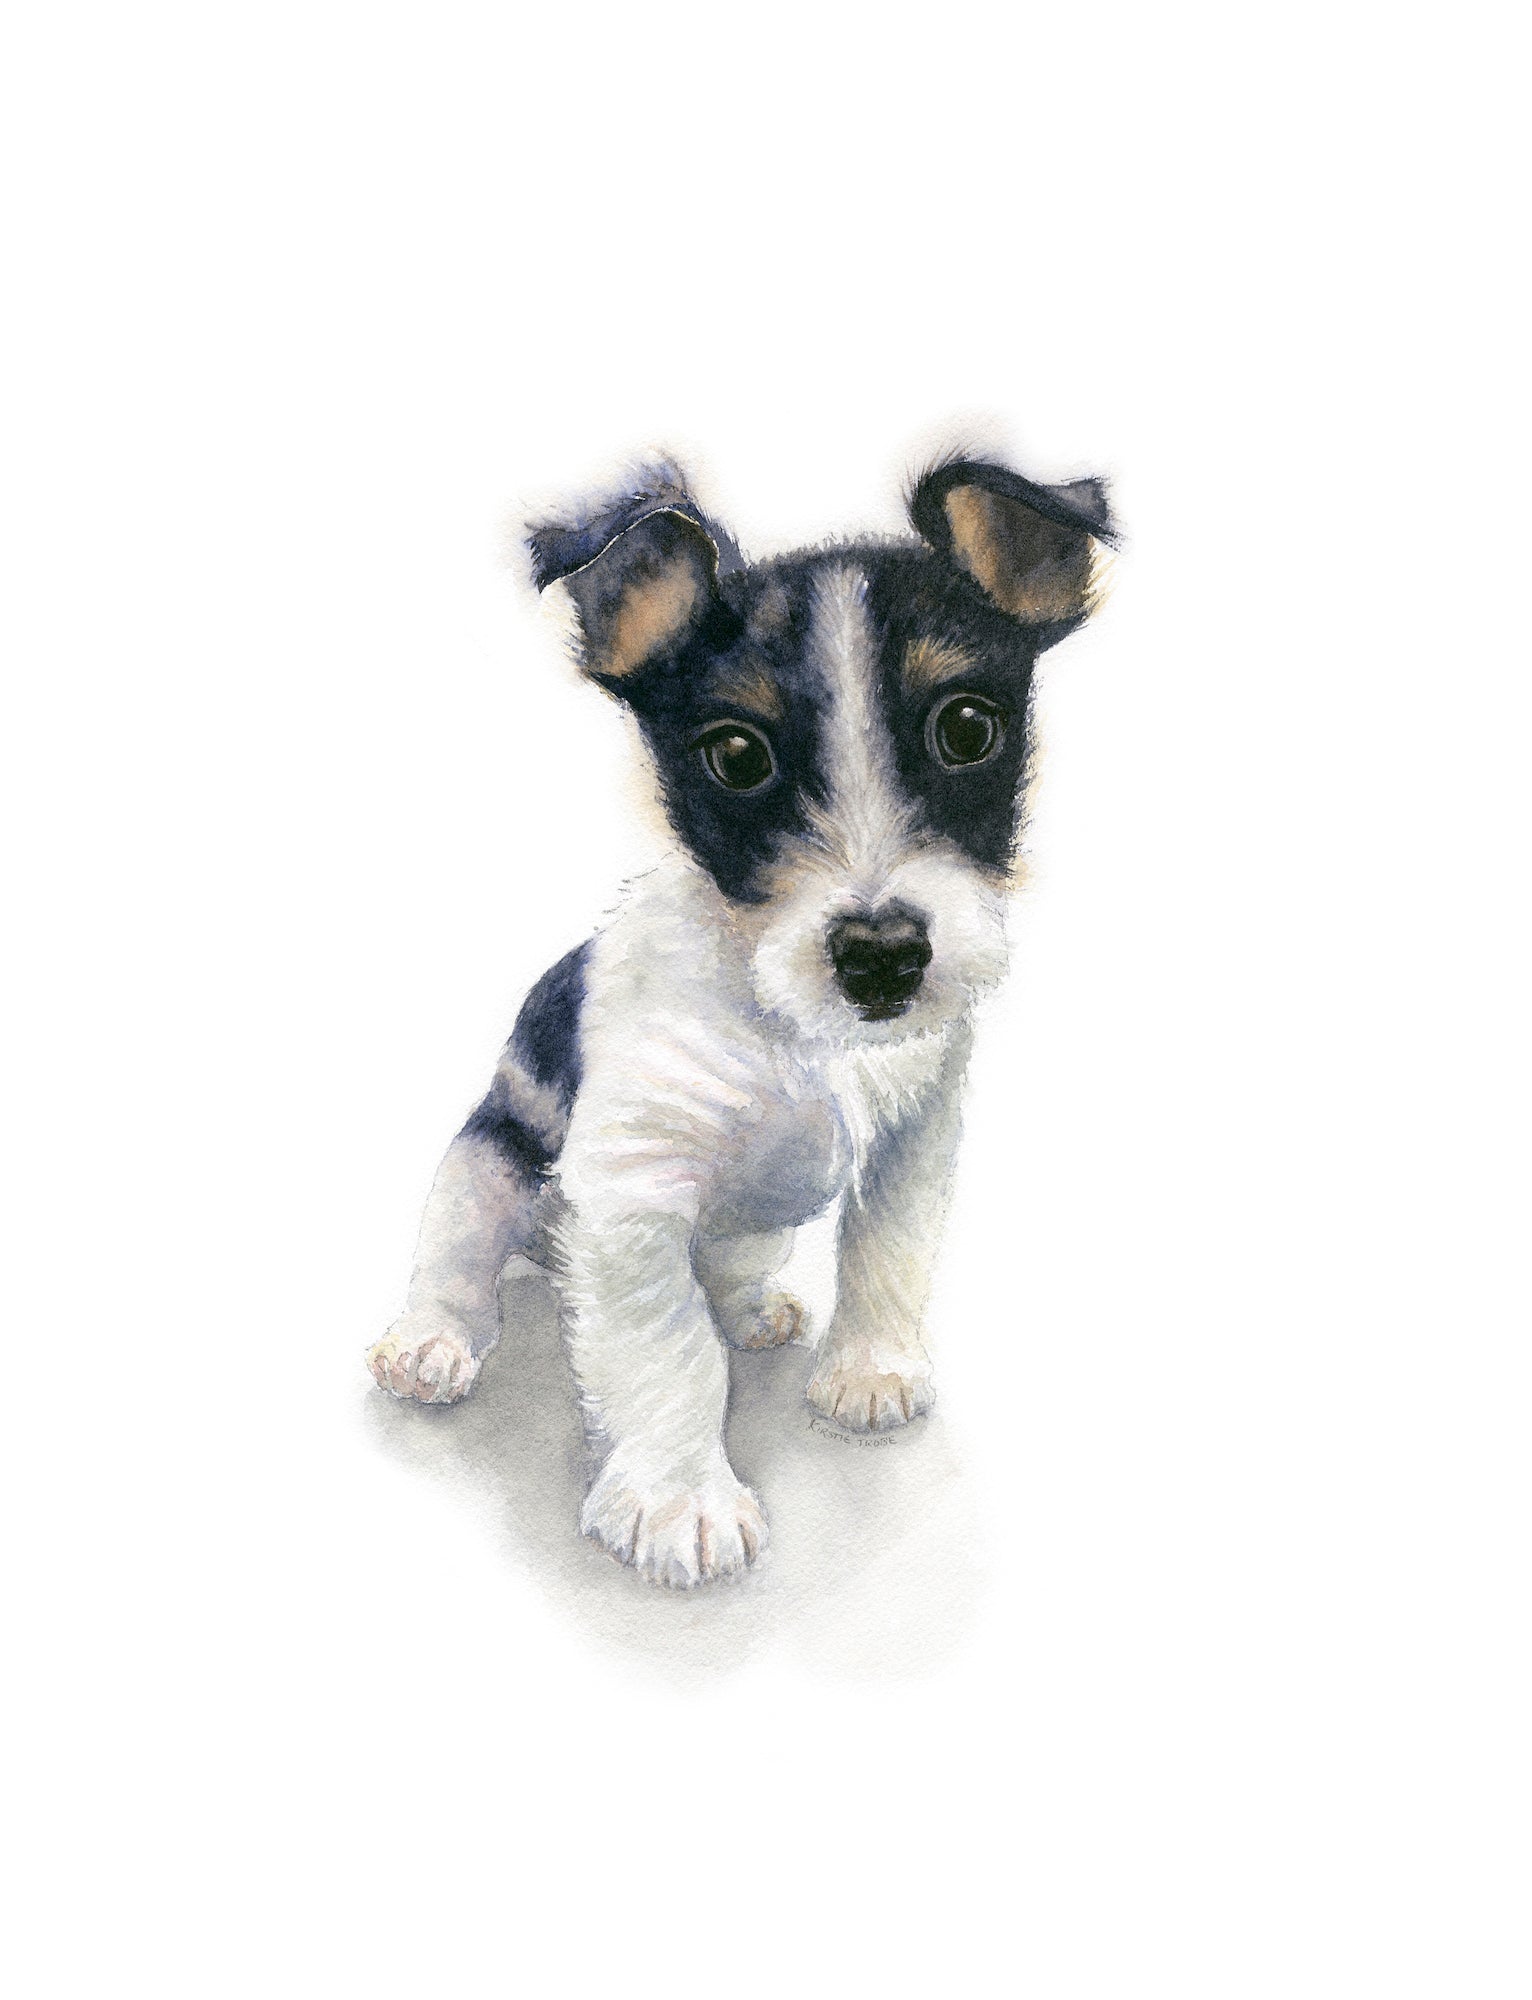 Abandoned Puppy. Image of a cute abandoned Jack Russell puppy staring imploringly out at the viewer. Centrally positioned against a white background. The puppy has a white body with black and tan markings and soft tufts of wiry fur around his muzzle and ears. Limited Edition Print.